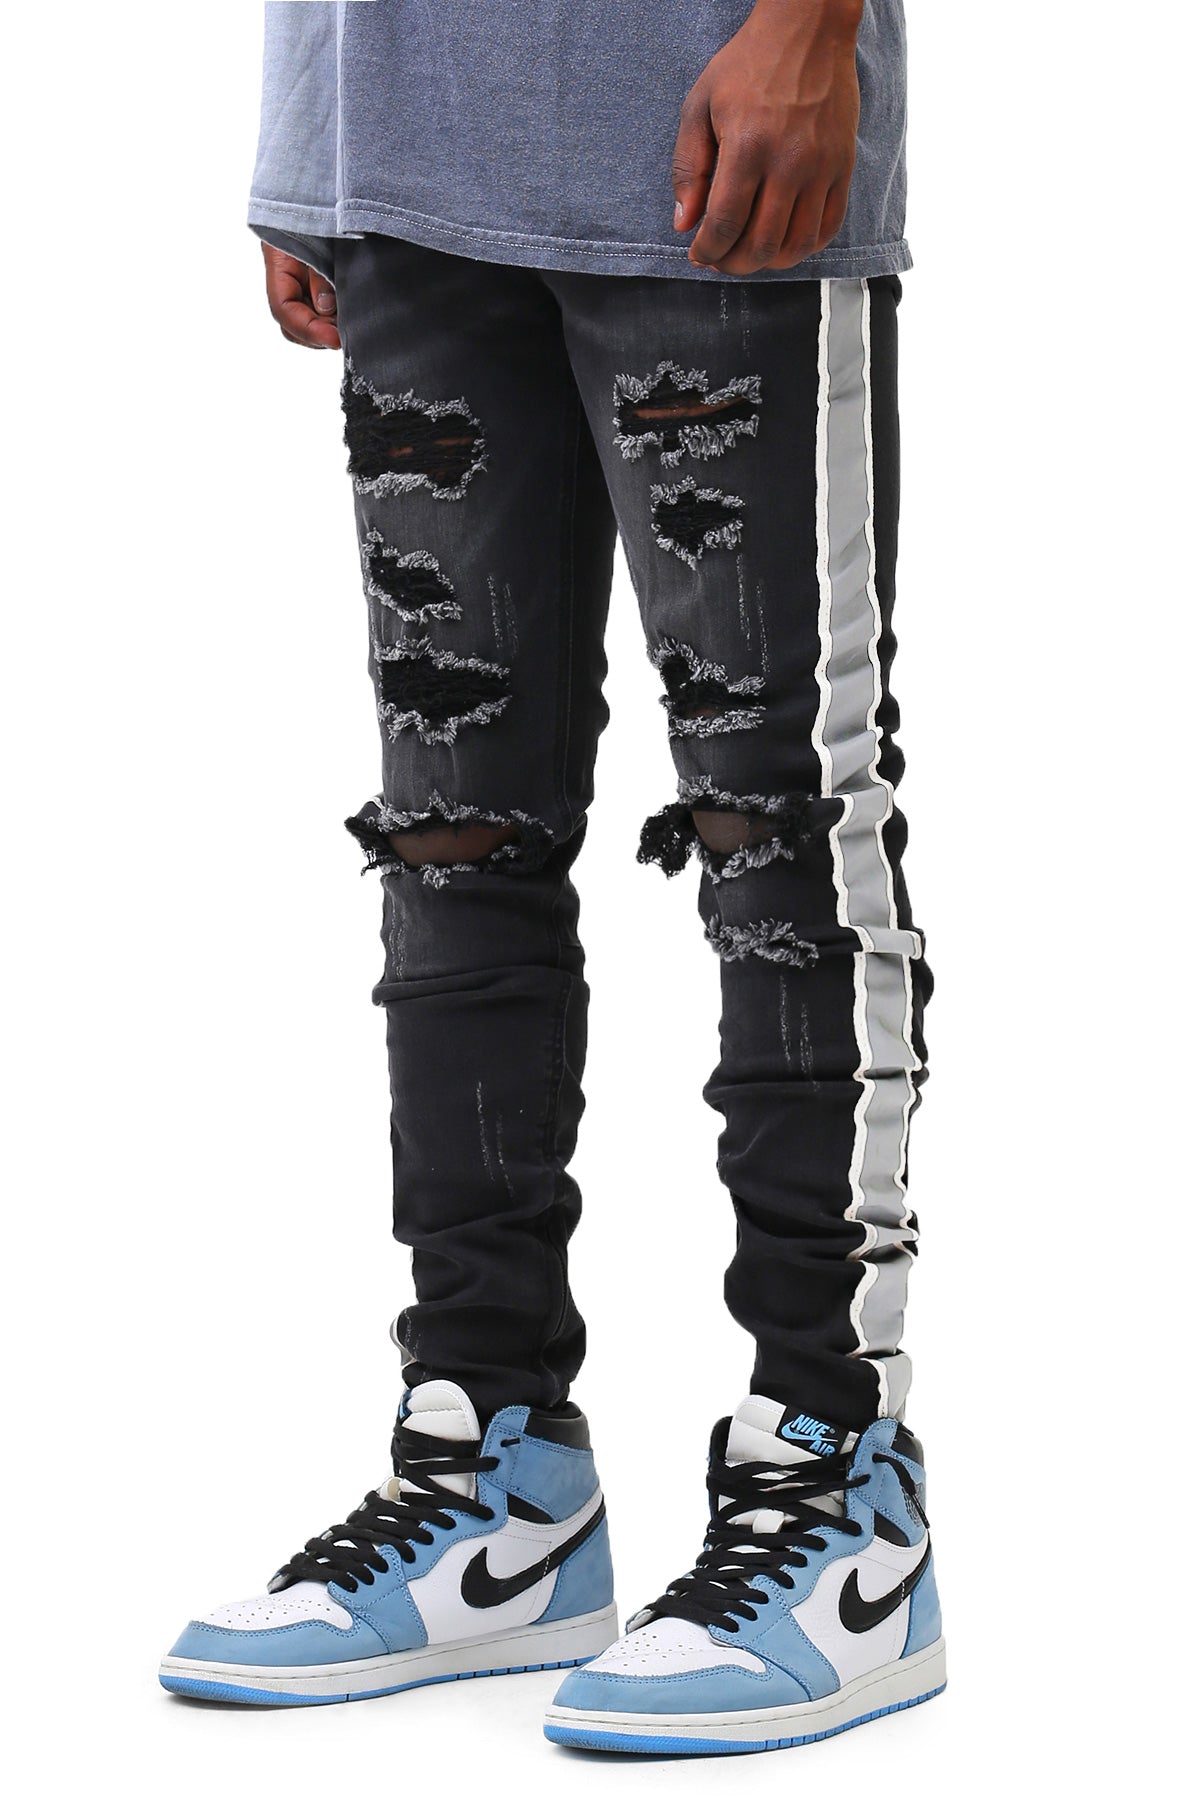 Reflective Taped Jeans (Black) (4905674047590)